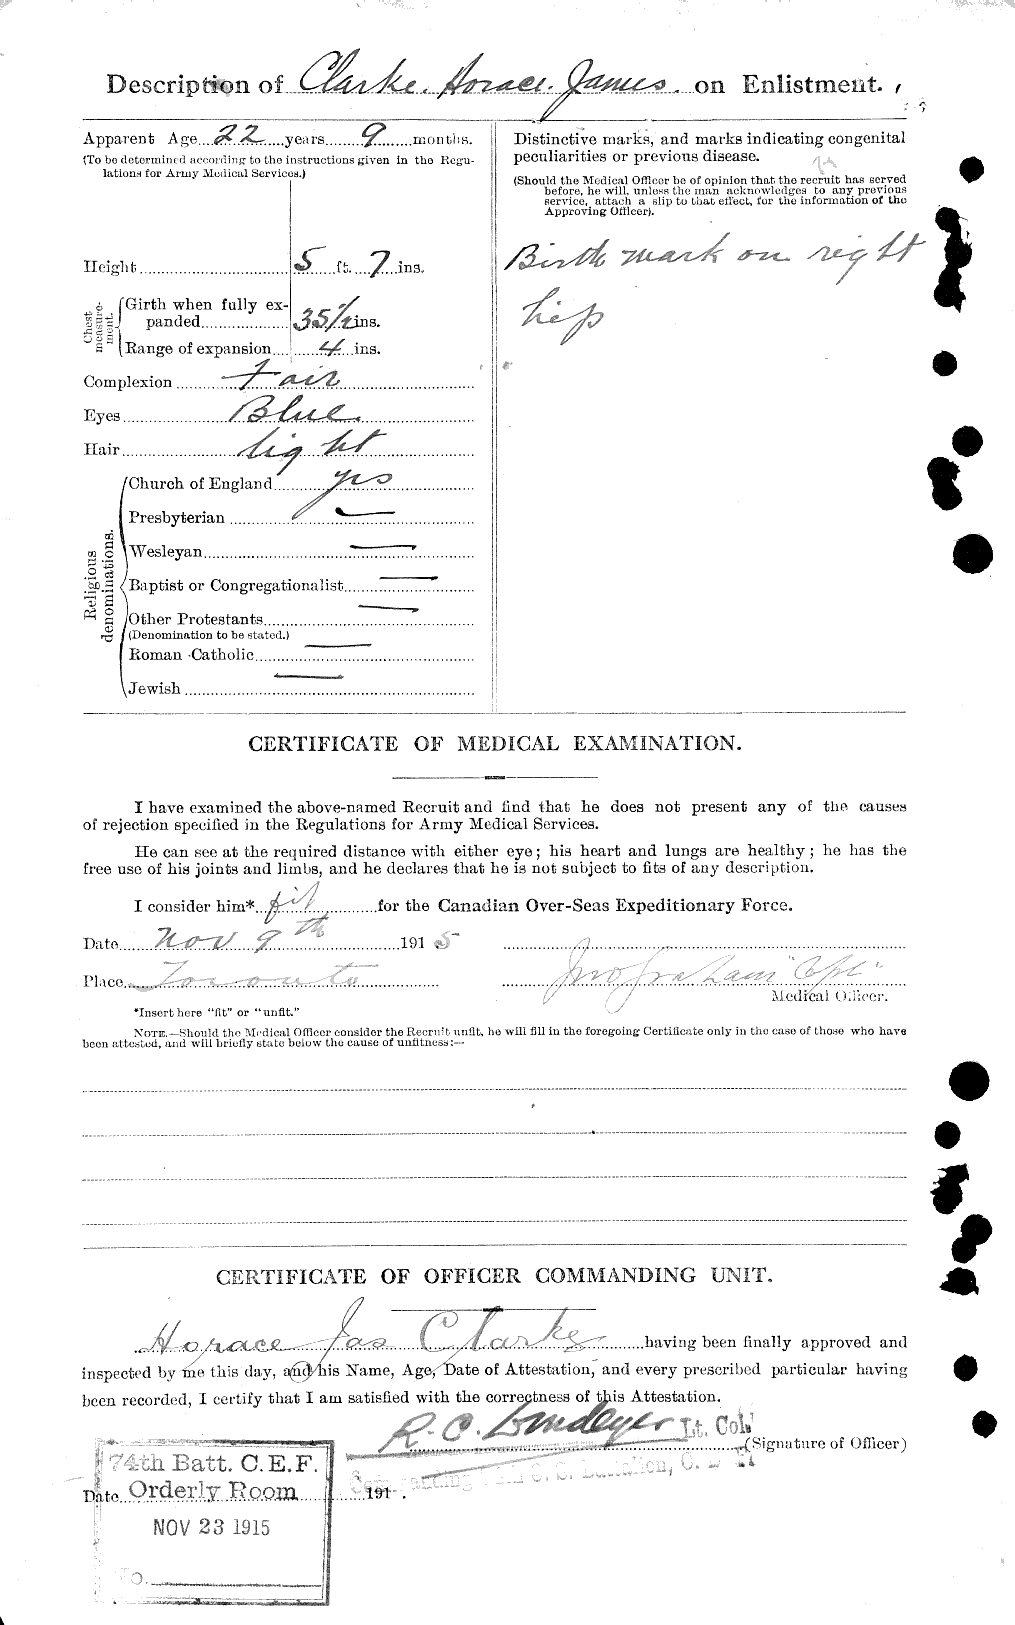 Personnel Records of the First World War - CEF 023292b